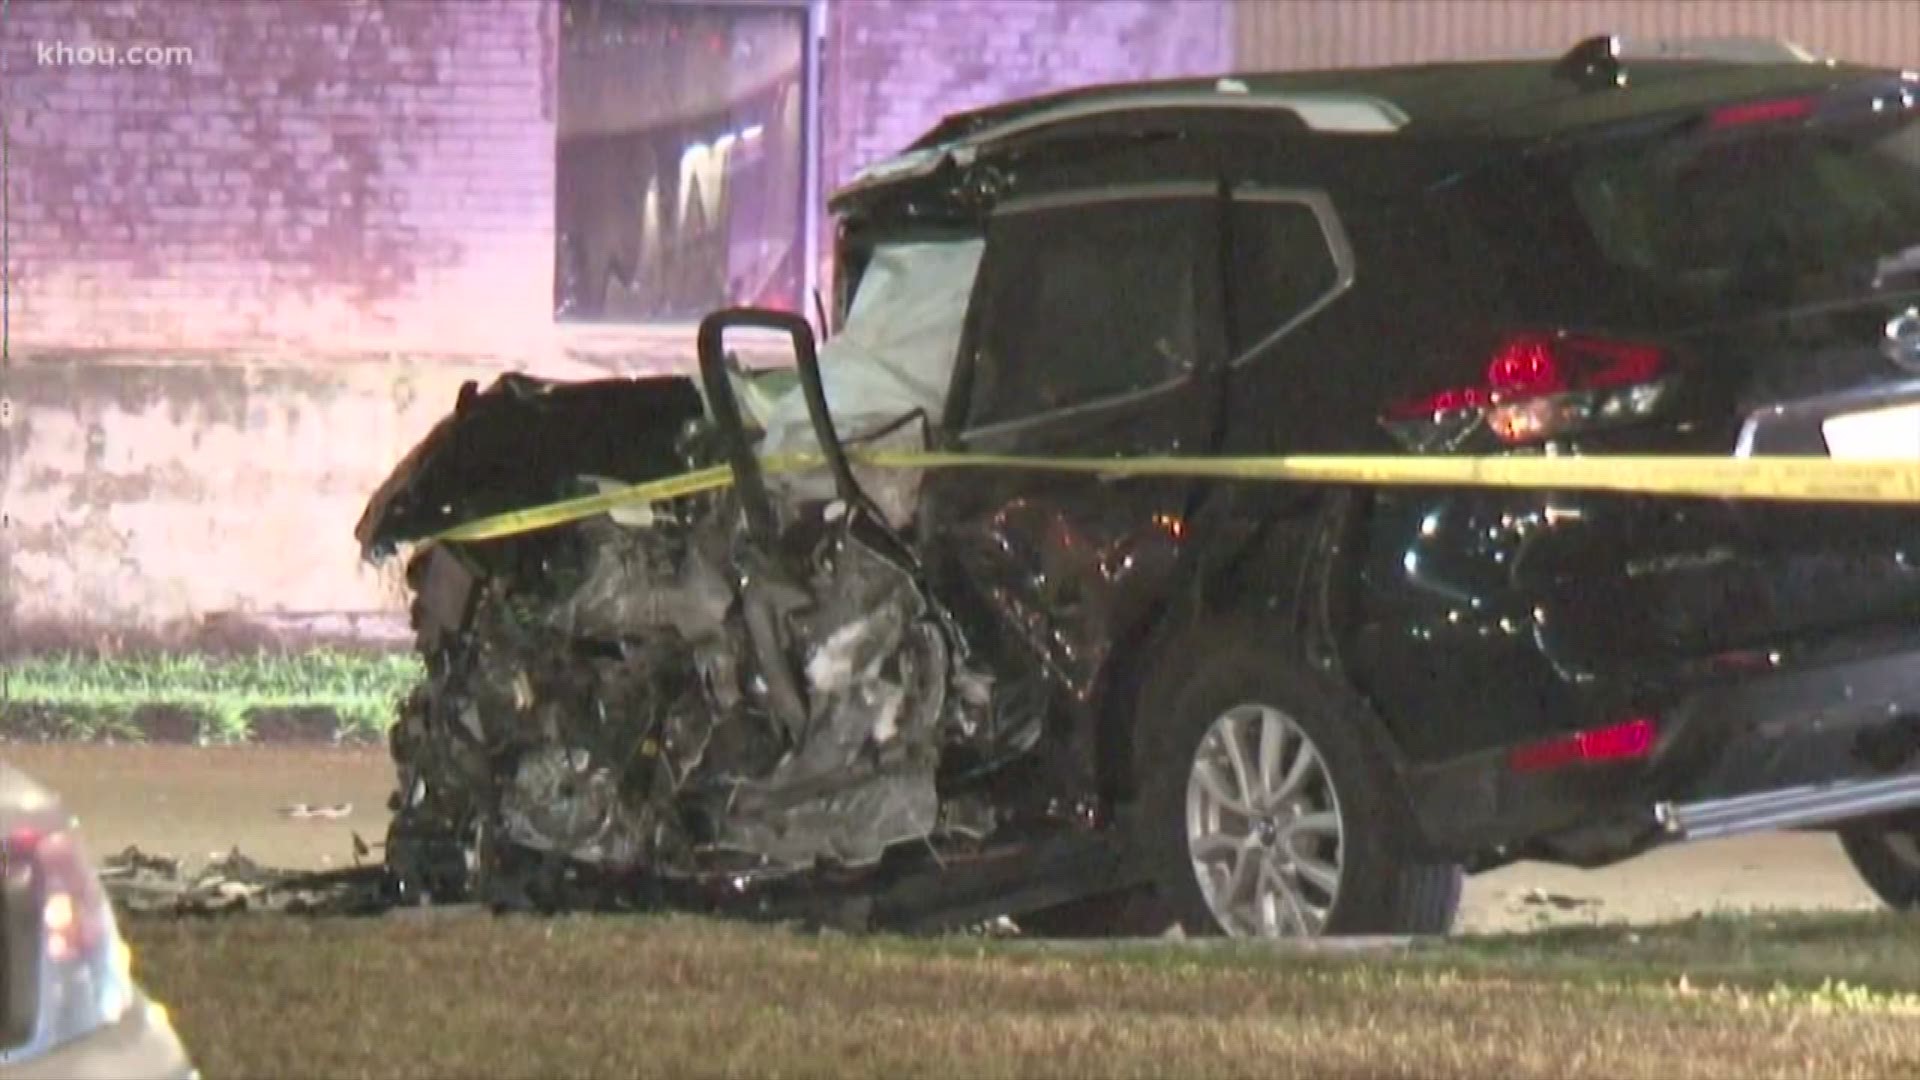 A woman was killed after being hit by an alleged drunk driver in South Houston early Monday morning, according to police.